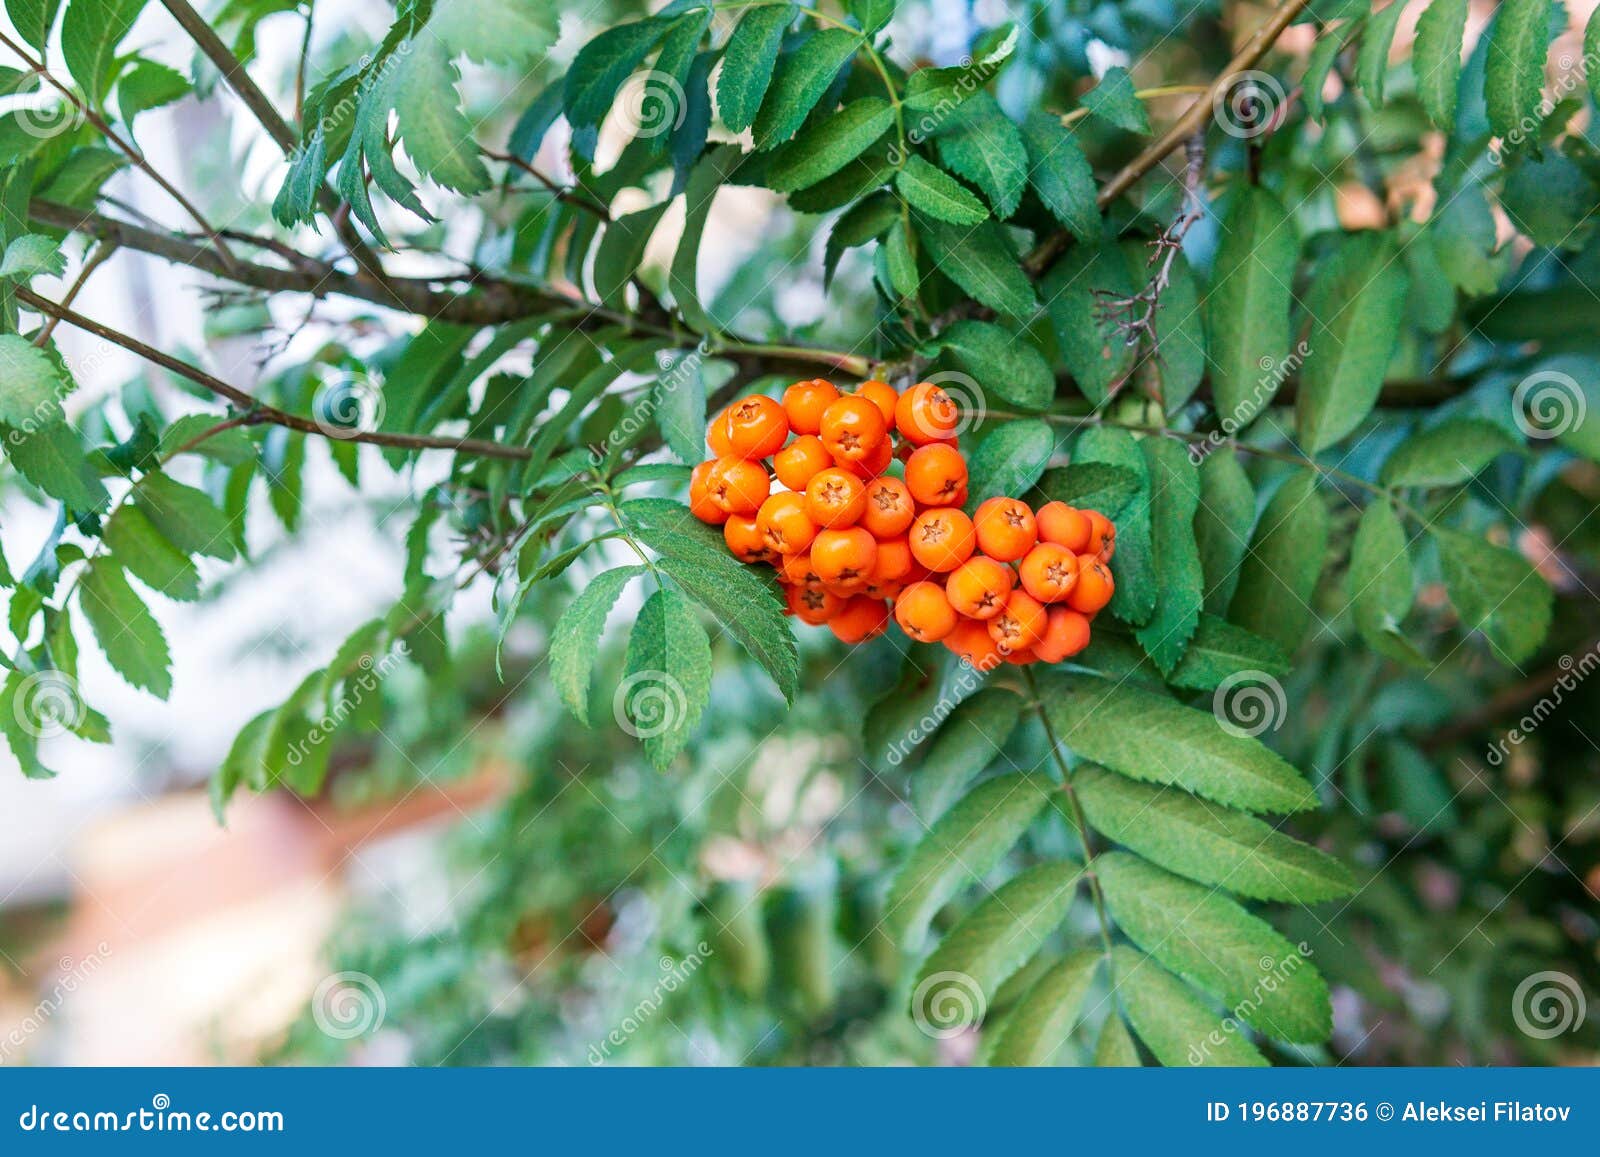 Tree with ash like leaves with branchy little fruits